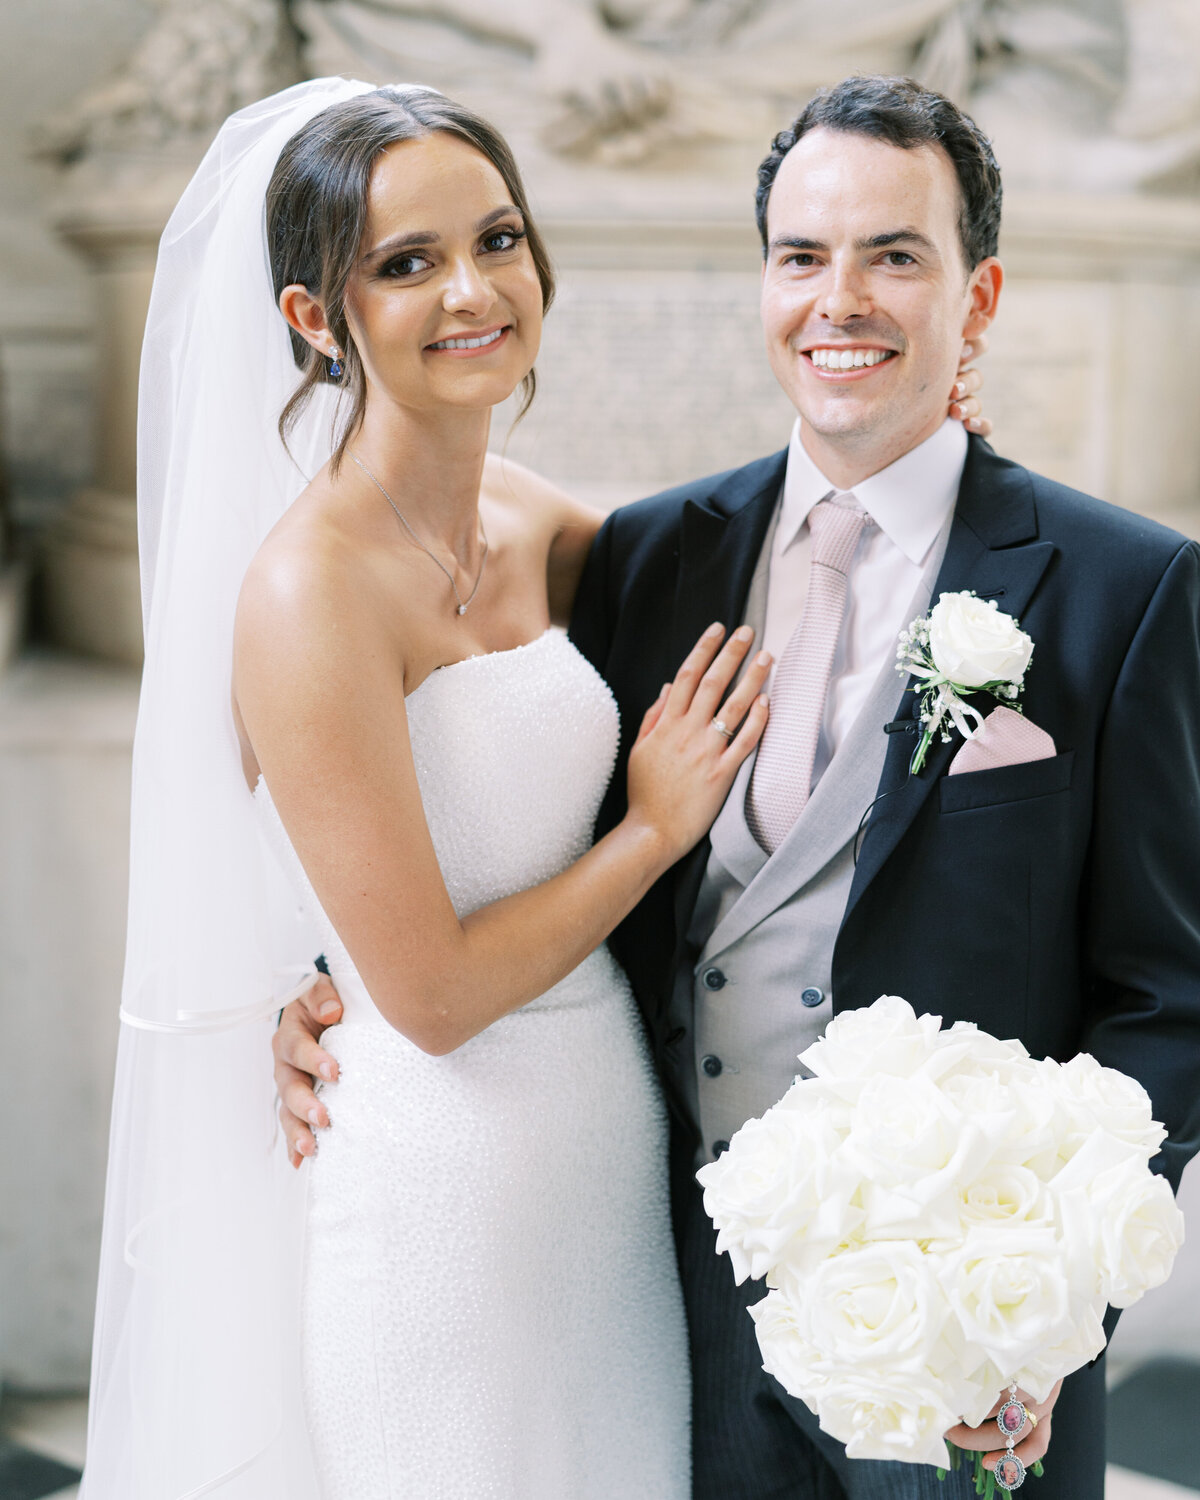 Bride and groom at traditional wedding in St Paul's Cathedral, with white rose bouquet